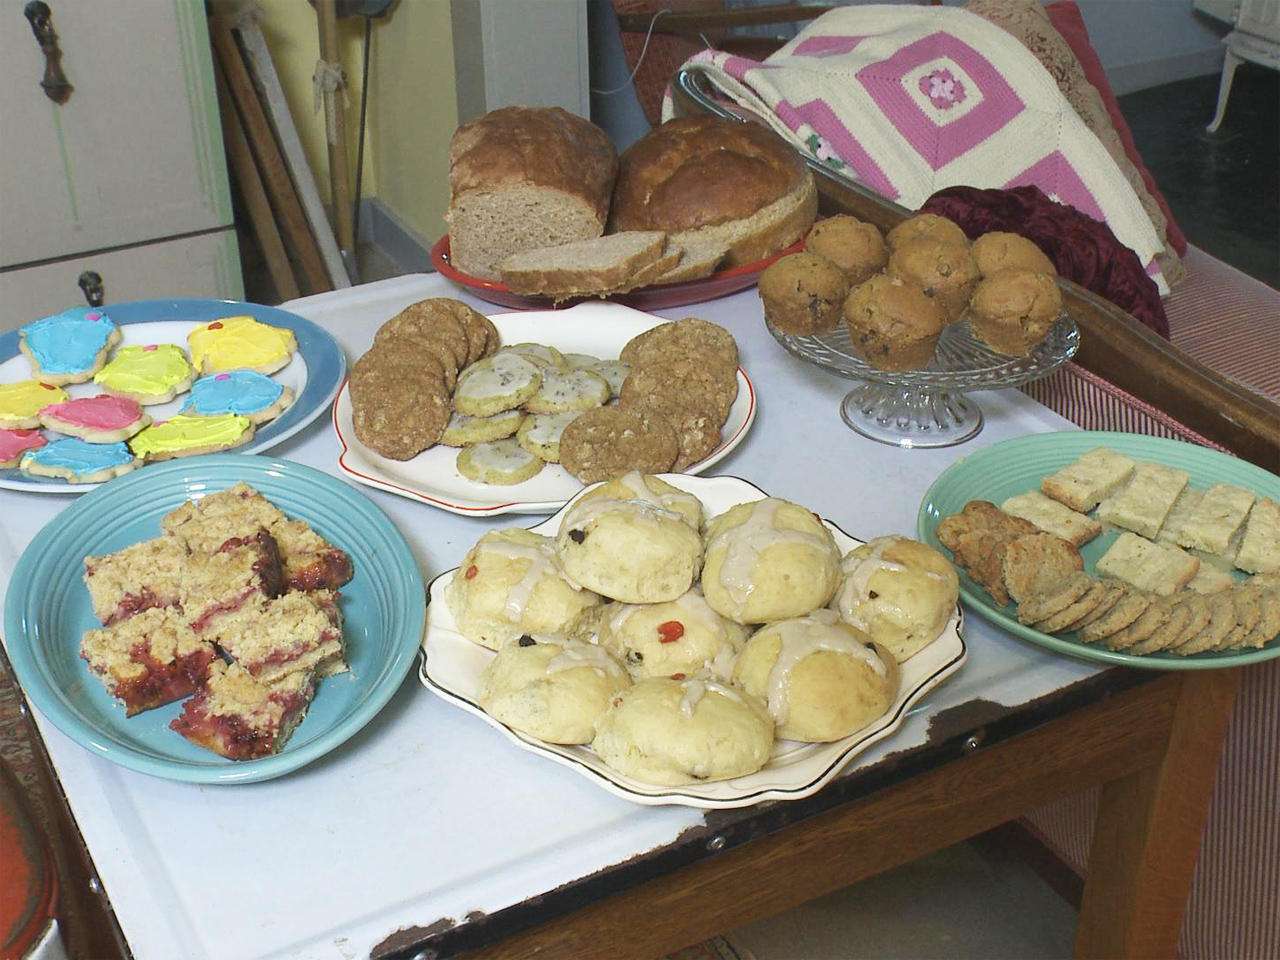 Selling homemade baked goods now legal in Wisconsin, judge ...